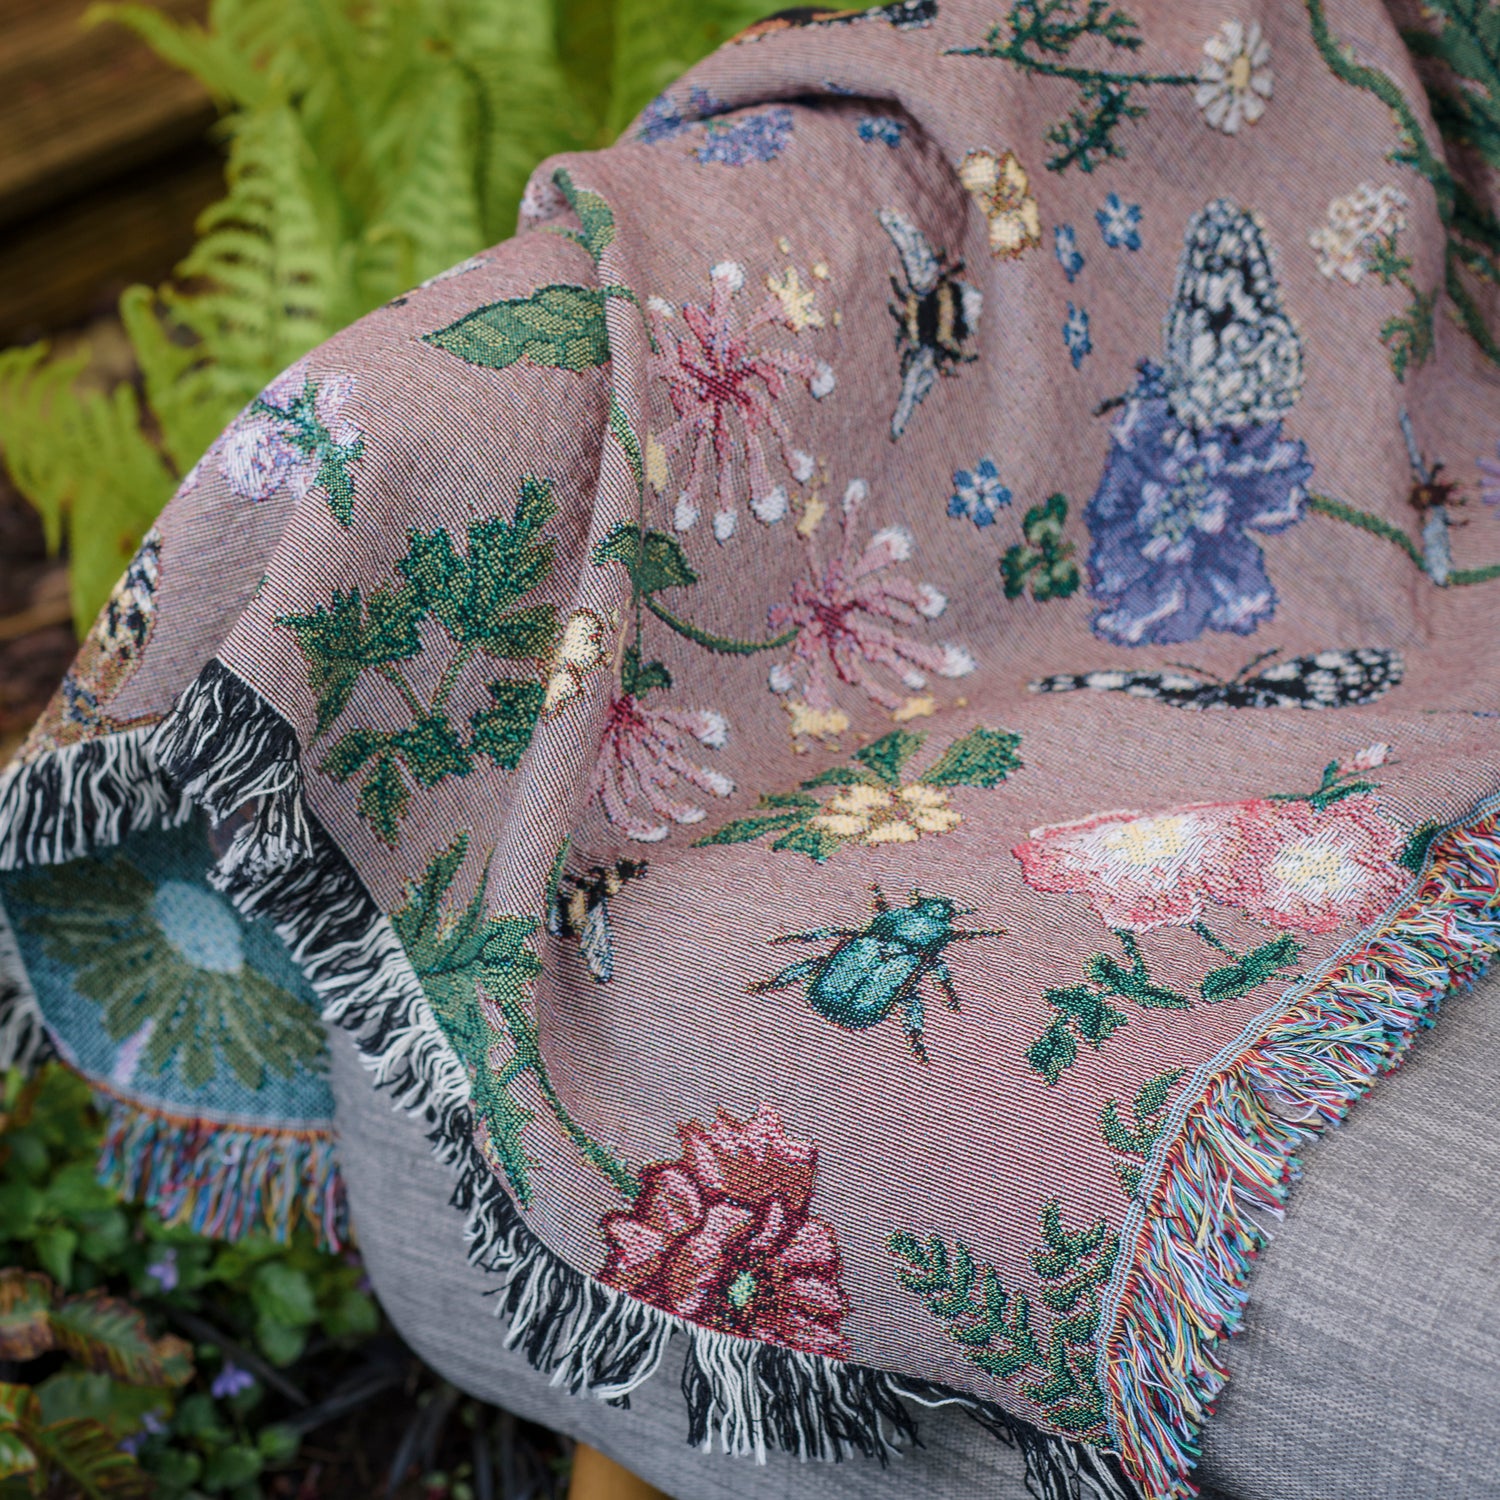 dusky pink woven wrap with bees, butterflies and flowers design draped over armchair